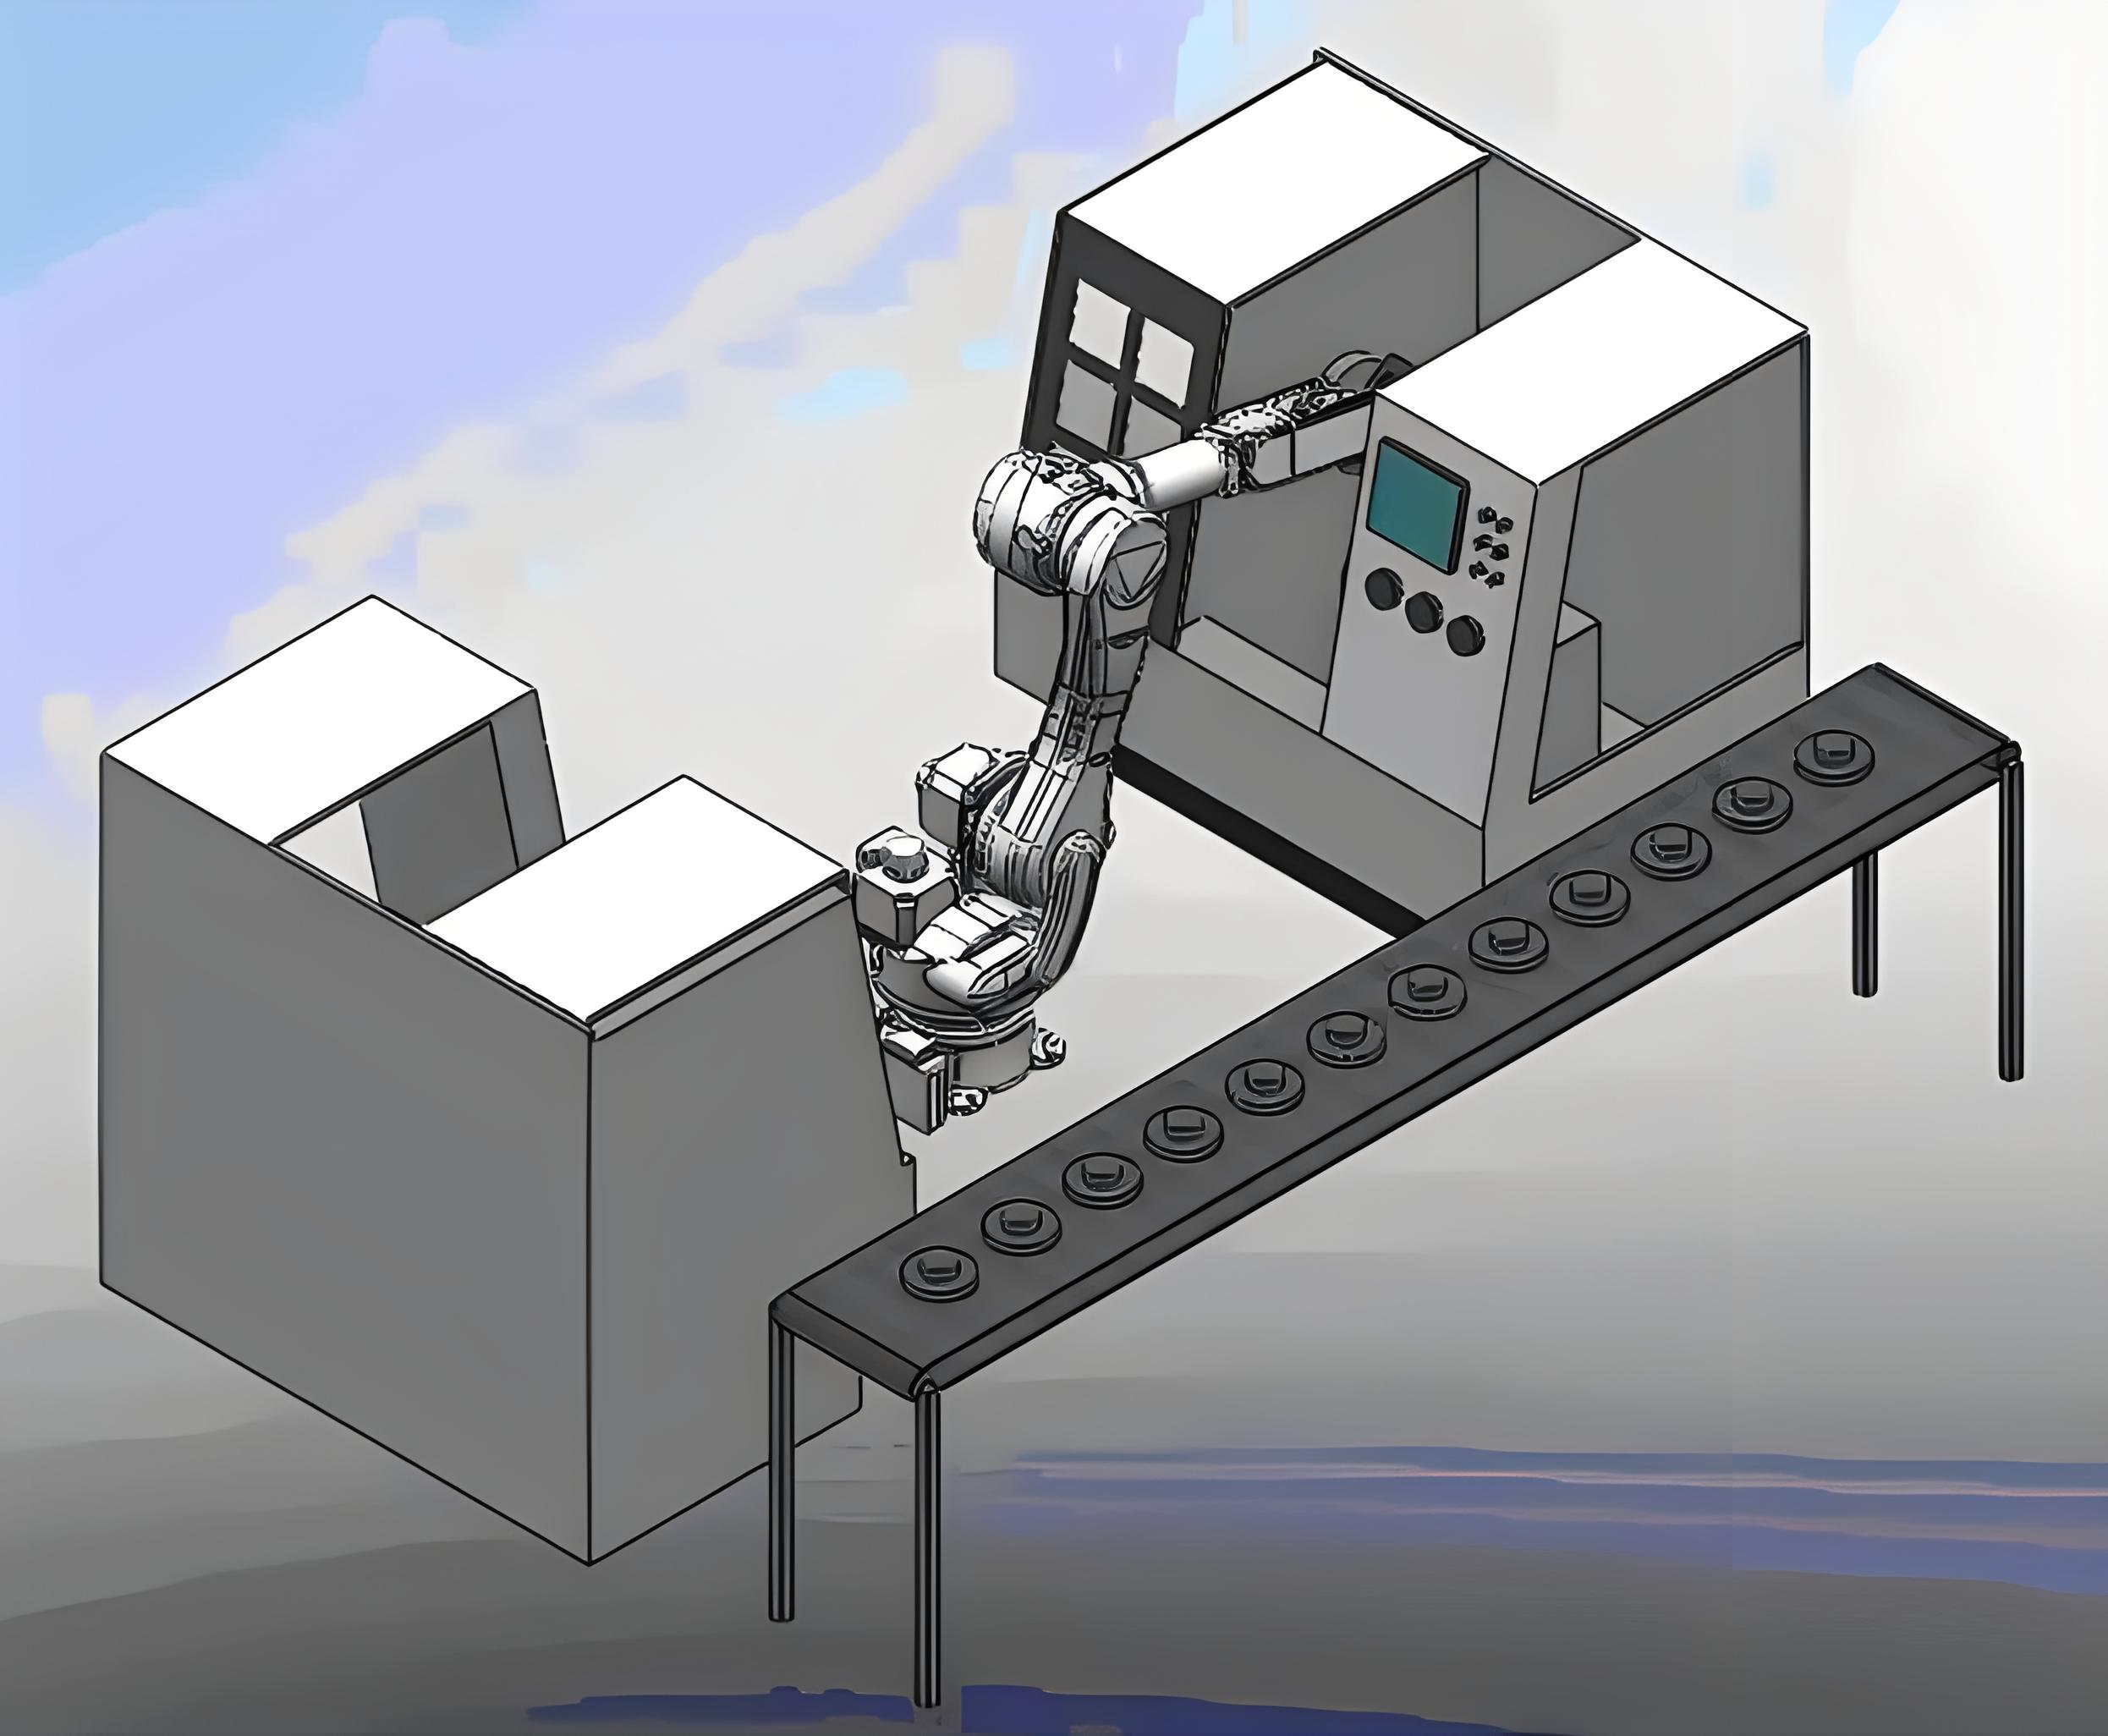  Introducing SCIC-Robot Solutions for CNC Machining Centers